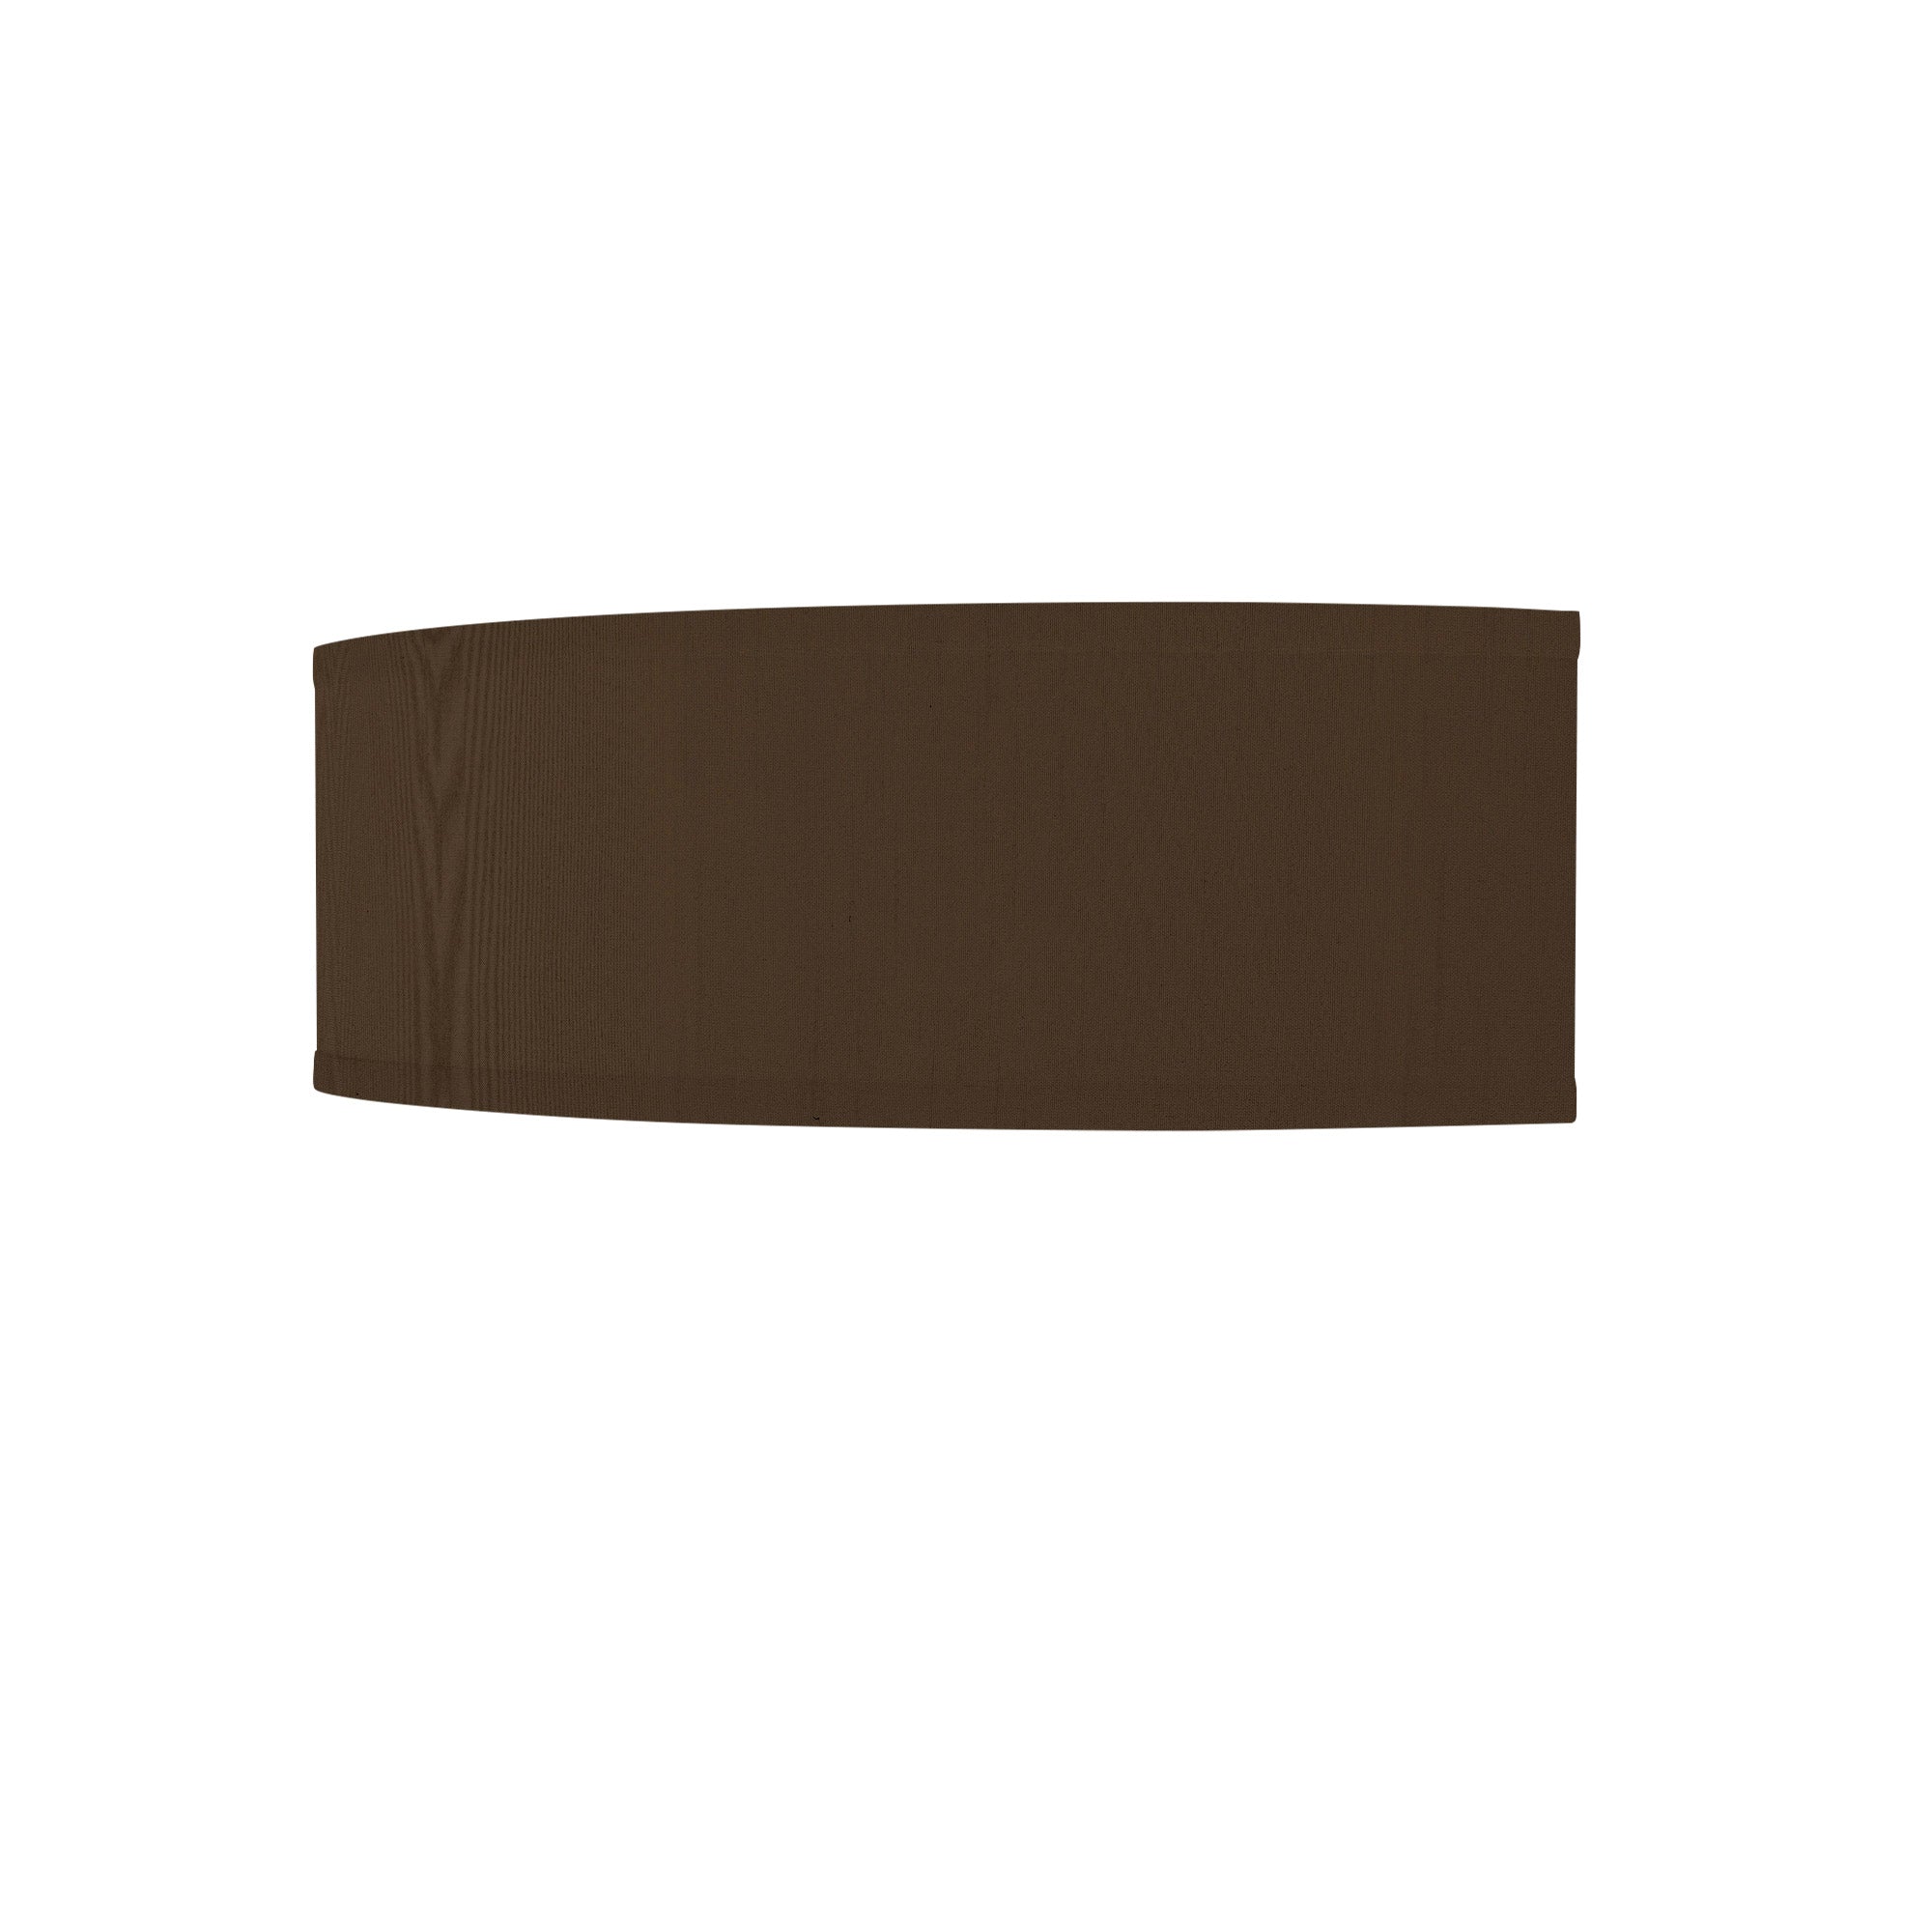 The Mora Wall Sconce from Seascape Fixtures with a silk shade in chocolate color.